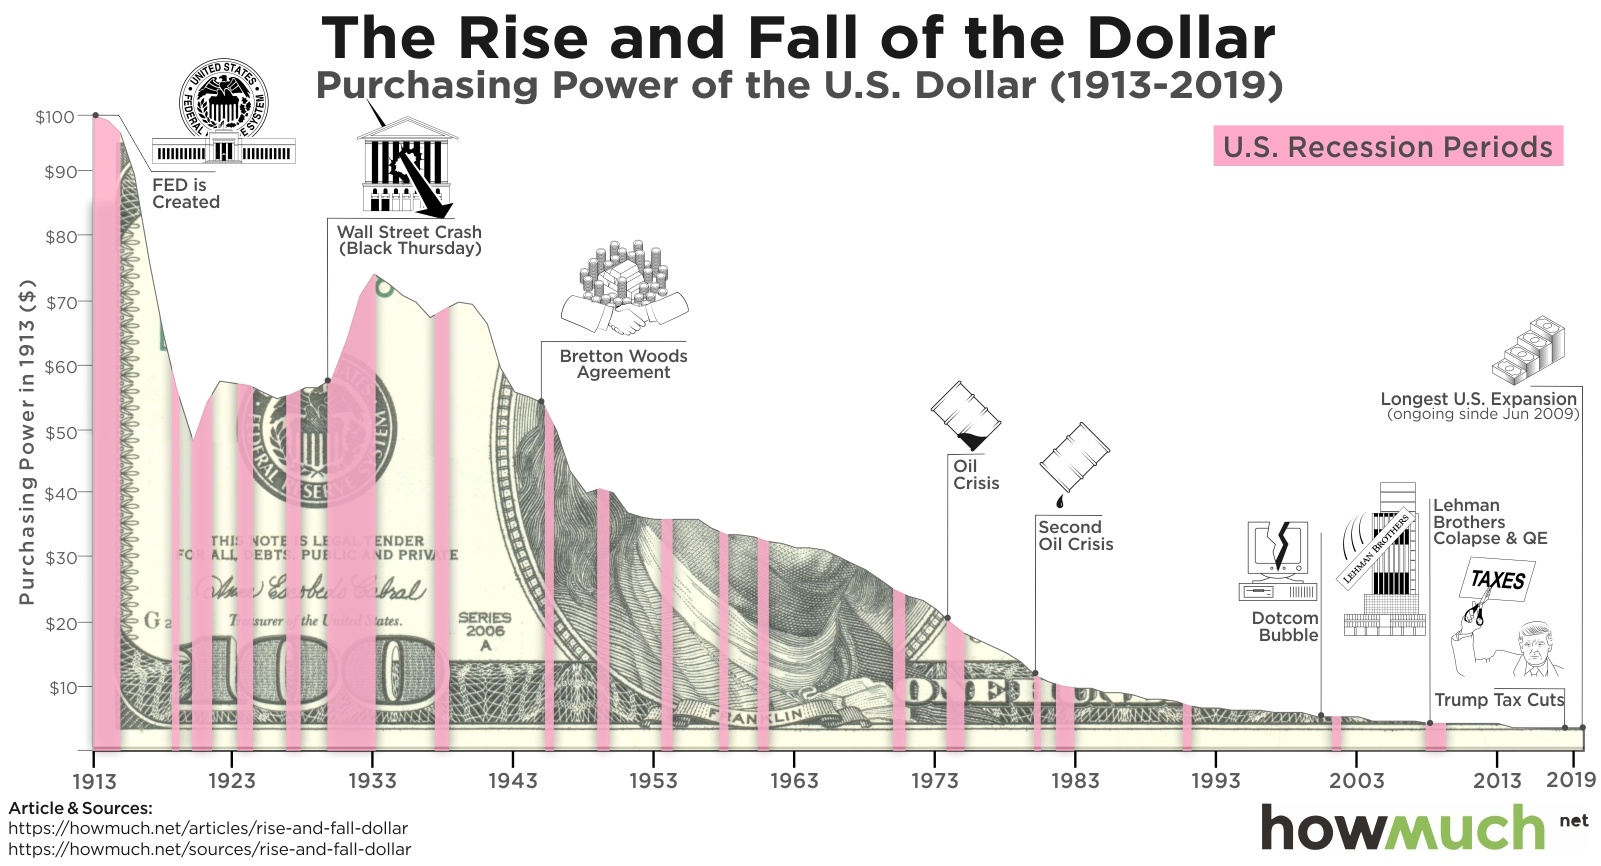 Purchasing Power of the Dollar